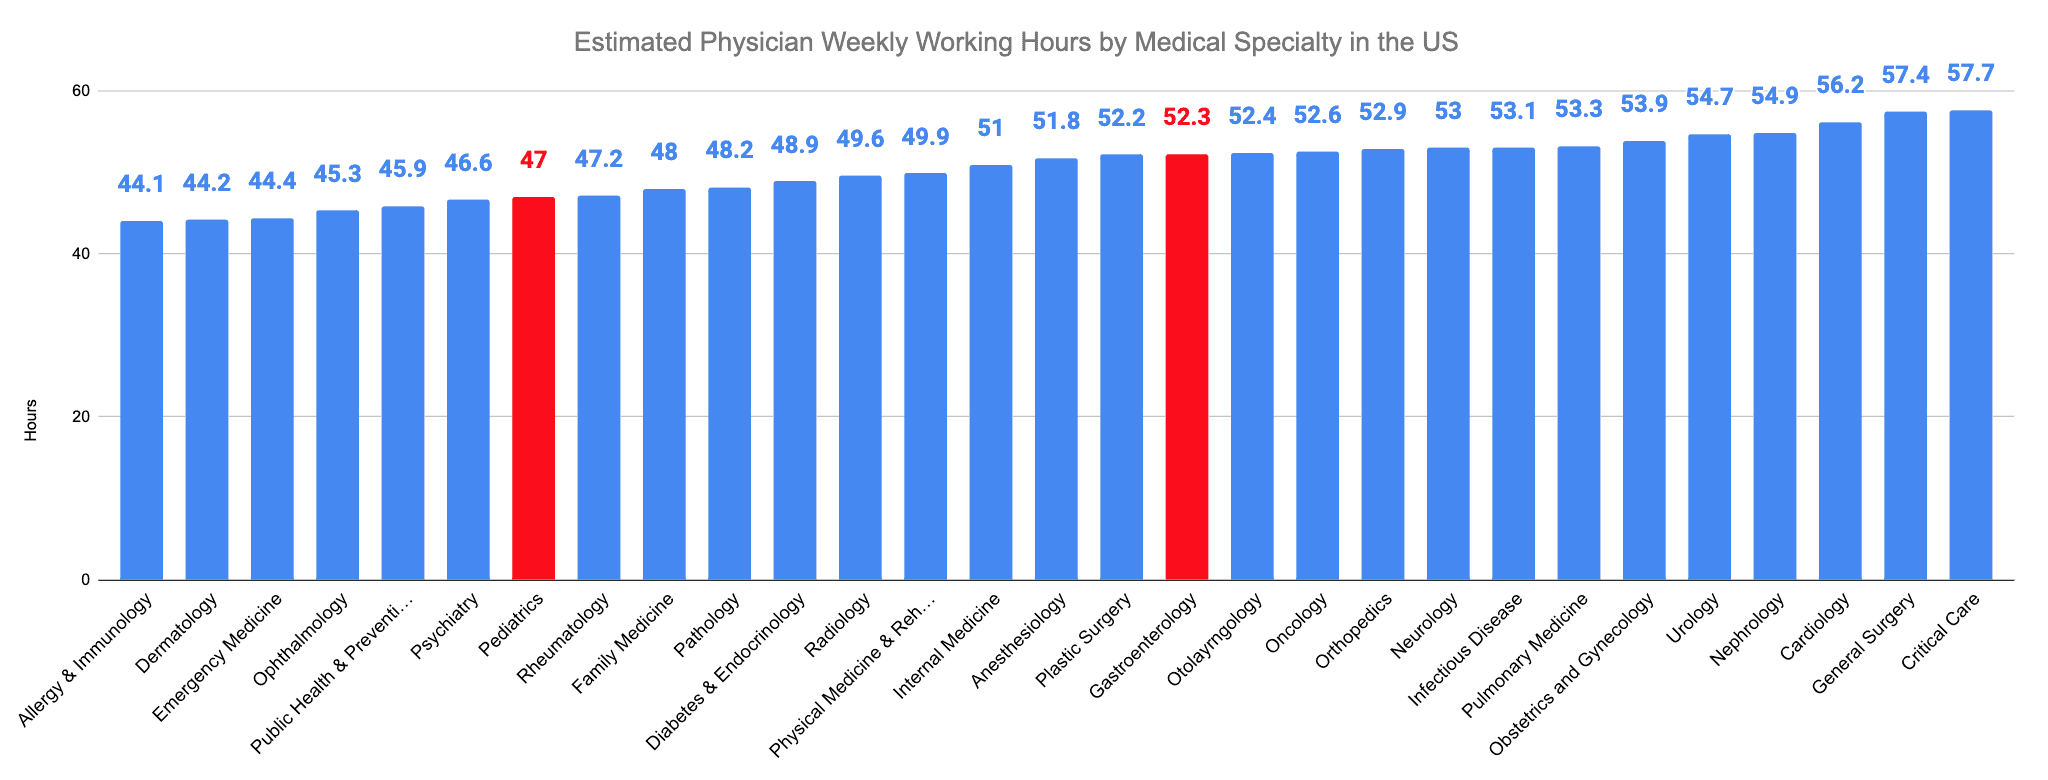 Gastroenterology vs. Pediatrics Estimated Physician Weekly Working Hours by Medical Specialty in the US